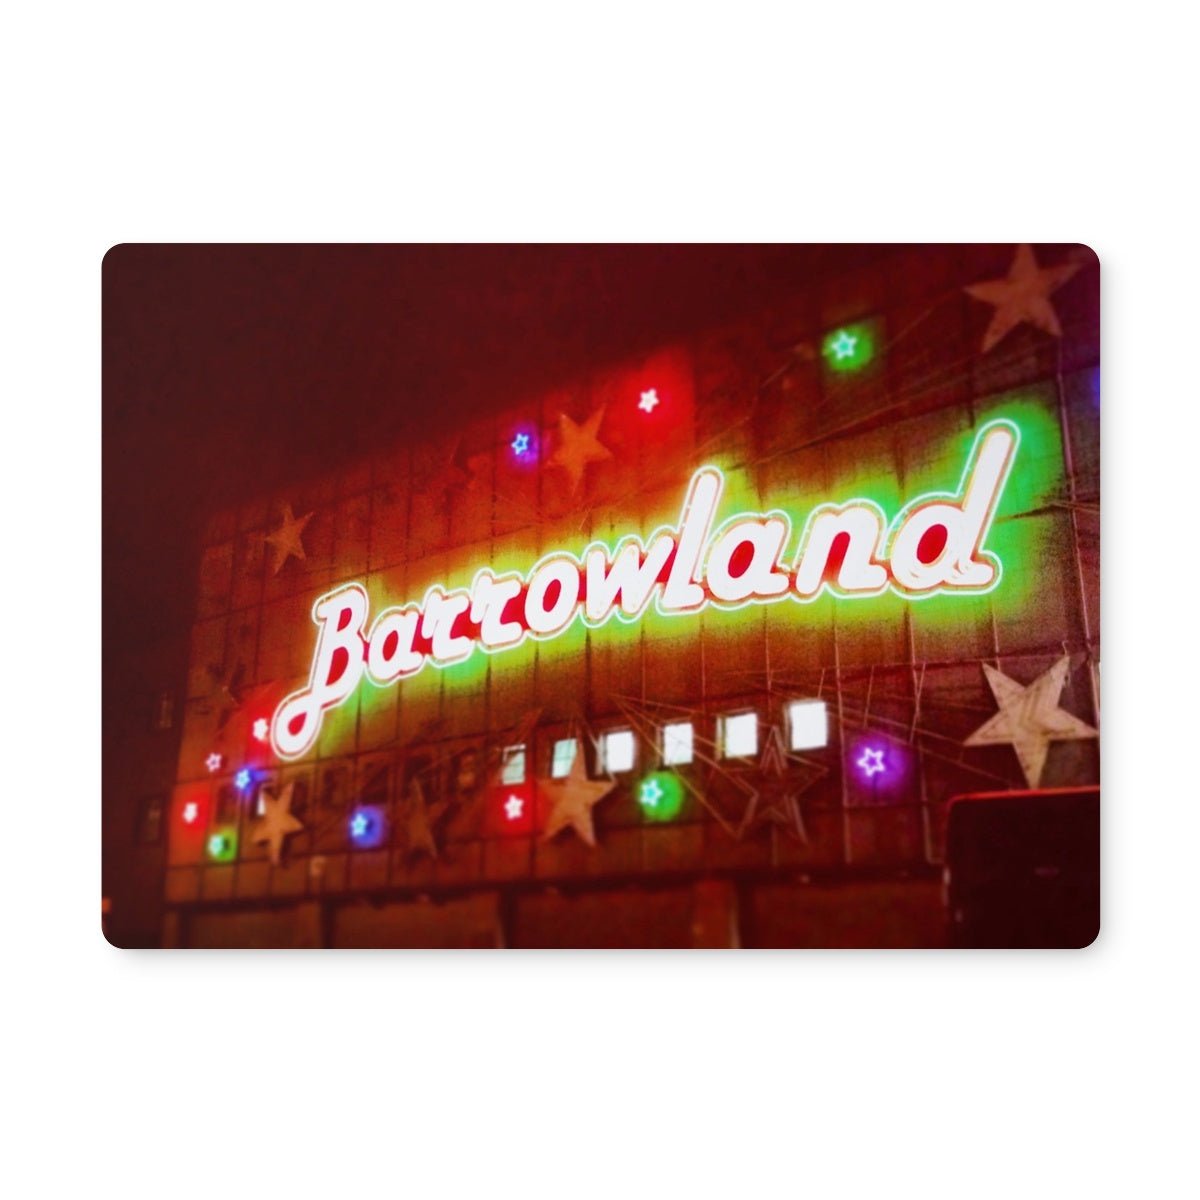 A Neon Glasgow Barrowlands Art Gifts Placemat-Placemats-Edinburgh & Glasgow Art Gallery-6 Placemats-Paintings, Prints, Homeware, Art Gifts From Scotland By Scottish Artist Kevin Hunter